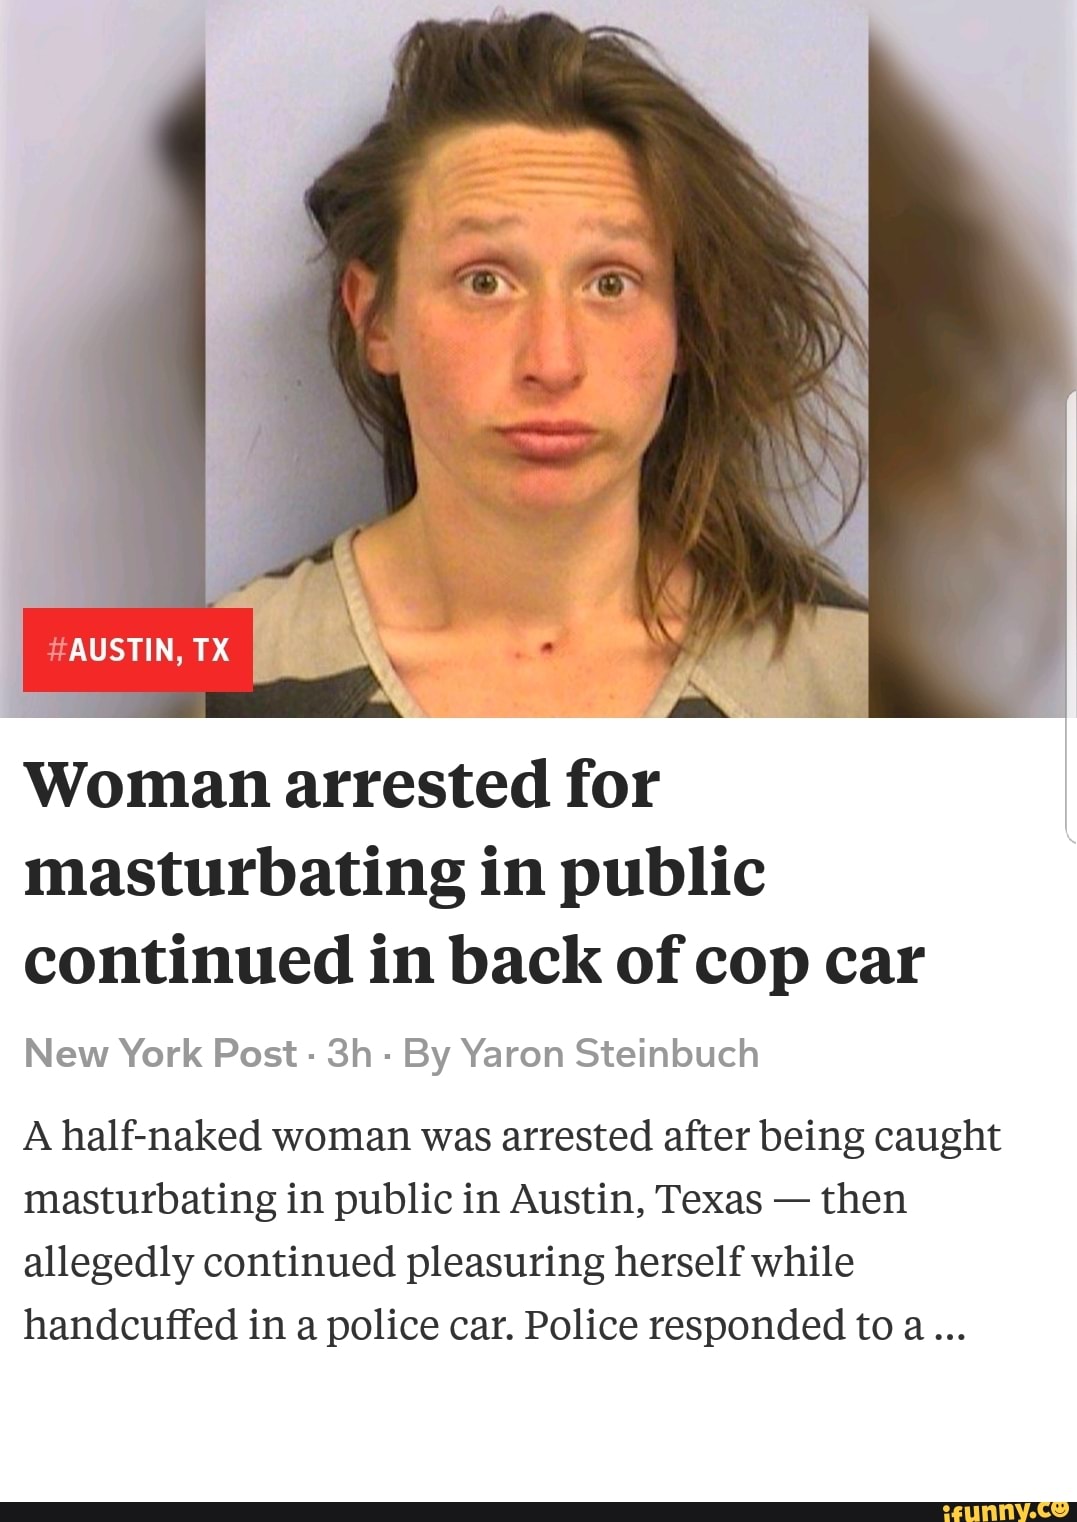 Woman Arrested For Masturbating In Public Continued In Back Of Cop Car